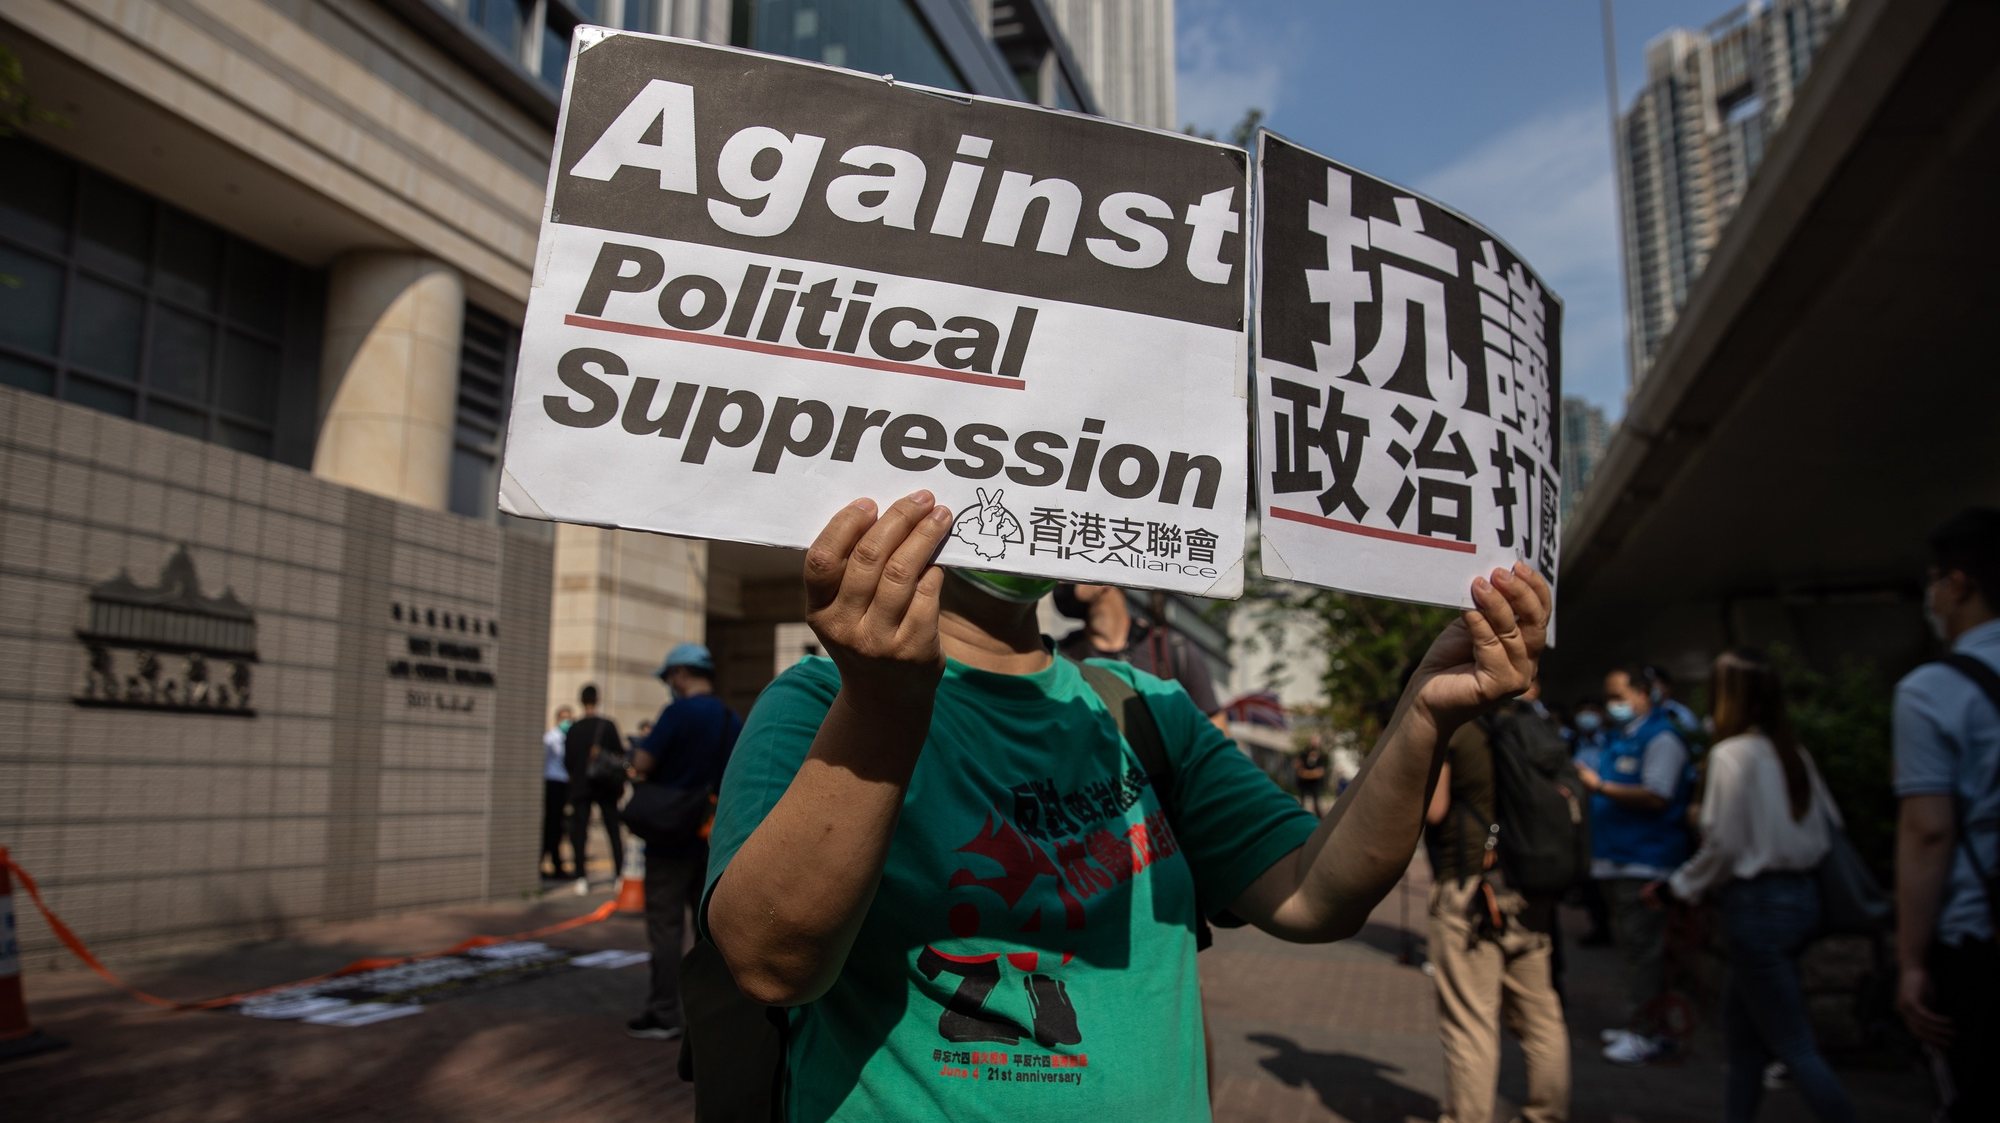 epa09109807 A pro-democracy activist holds banners outside the West Kowloon court buildings in Hong Kong, China, 01 April 2021. Nine democracy activists face verdict on 01 April for unauthorized assembly in August 2019.  EPA/JEROME FAVRE